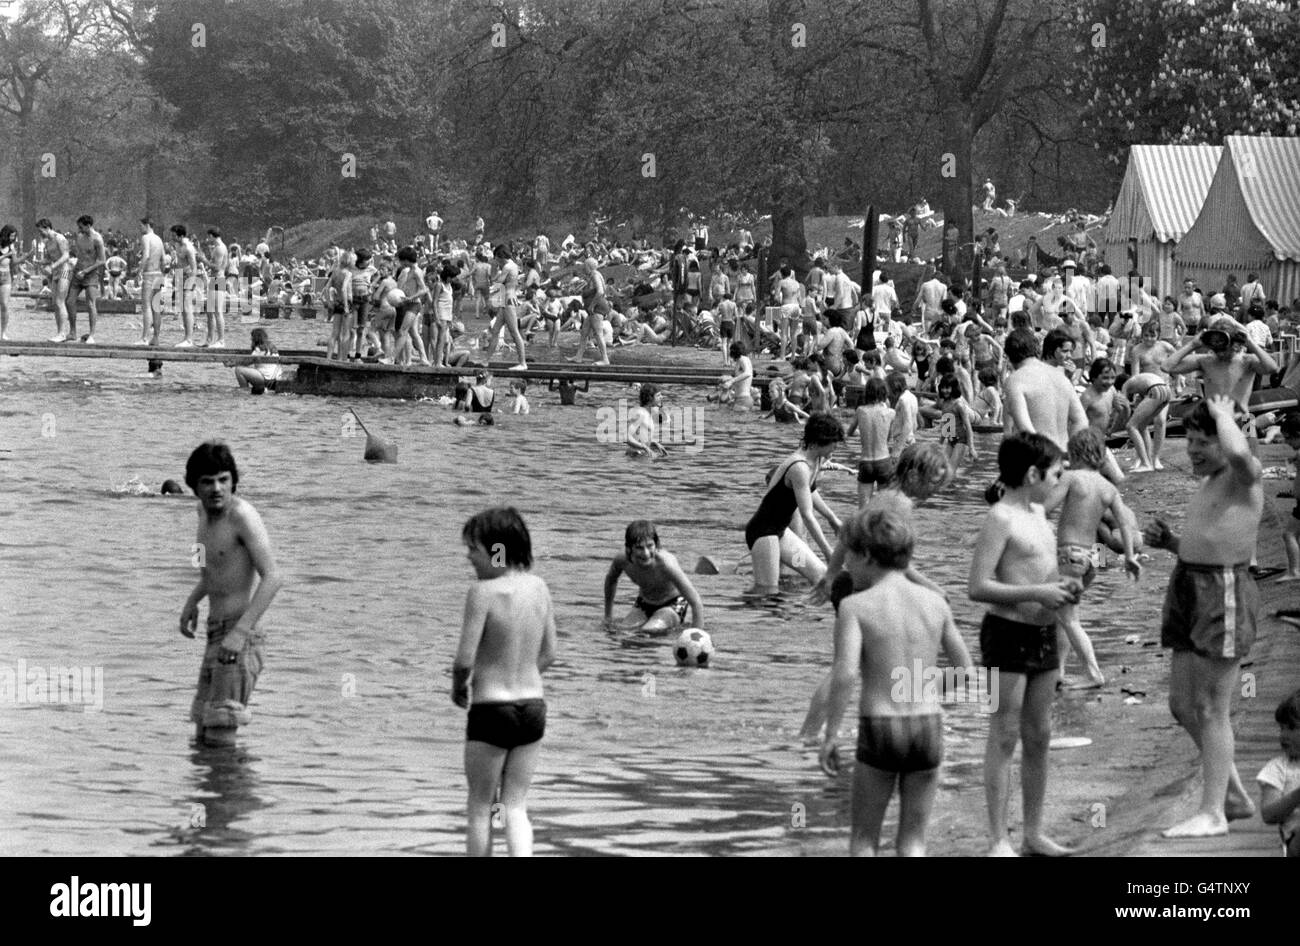 London Serpentine crowds. Crowds gather at the London Serpentine in Hyde Park during the Summer Stock Photo